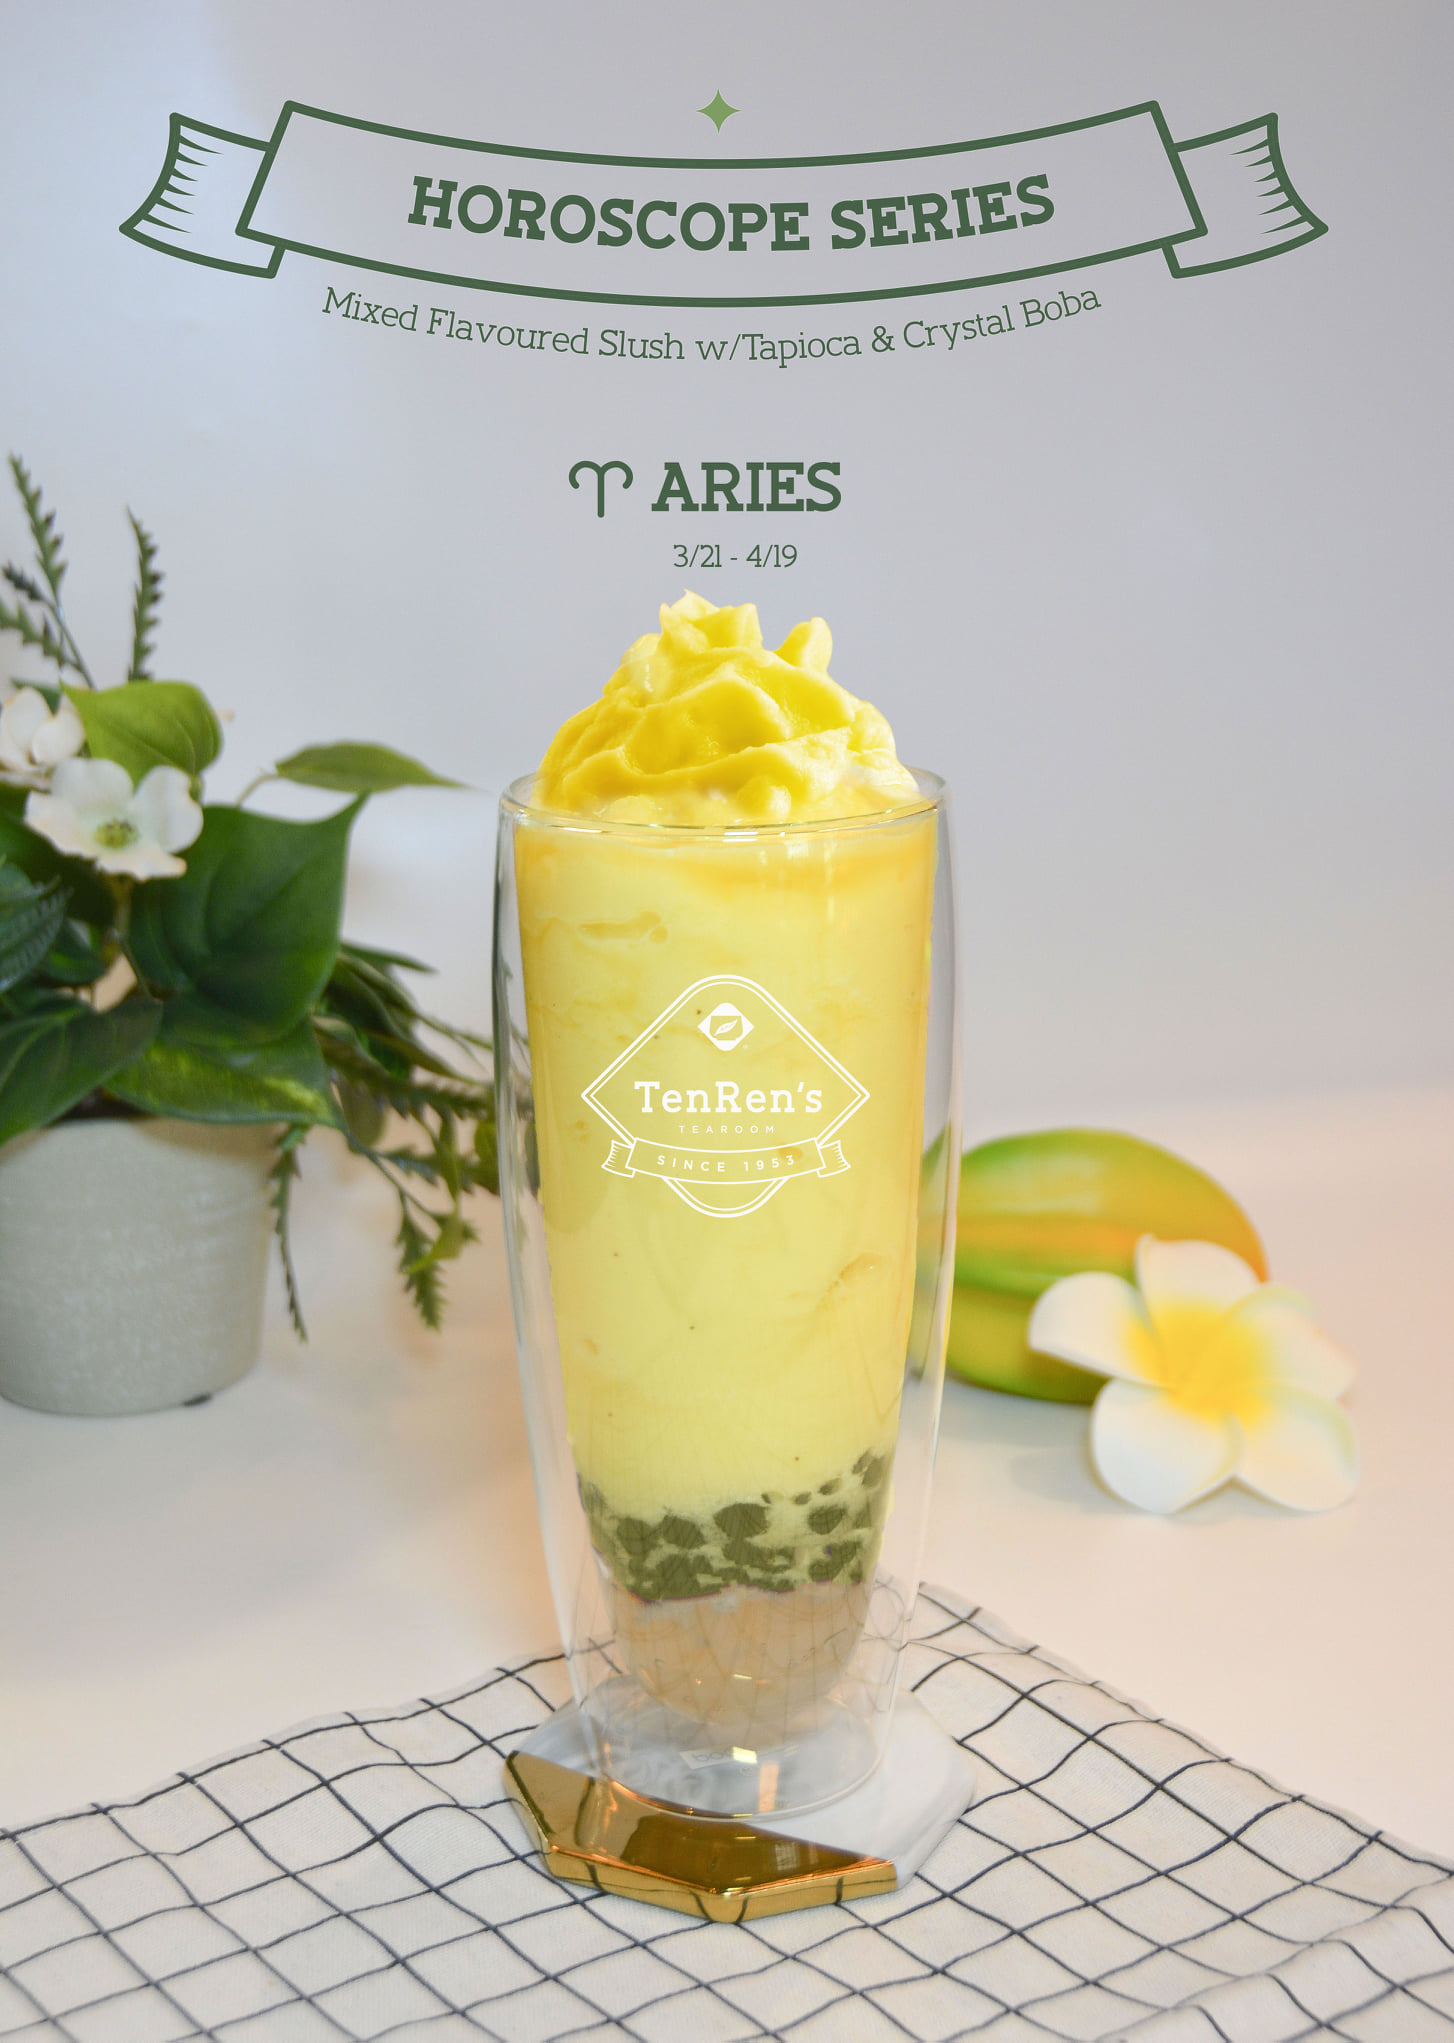 《Horoscope Series》Introducing Aries! With luscious flavours of Peach and Pineapple Slush and served with Tapioca & Crystal Boba. Enjoy this delicious cup of ARIES with the warm weather this week. Stay safe and stay happy!  Selected stores remain open for take-out and delivery (please call ahead to order or visit www.tenrenstea.com to order online) ✔️Yonge & Empress Walk (416-229-1688) ...